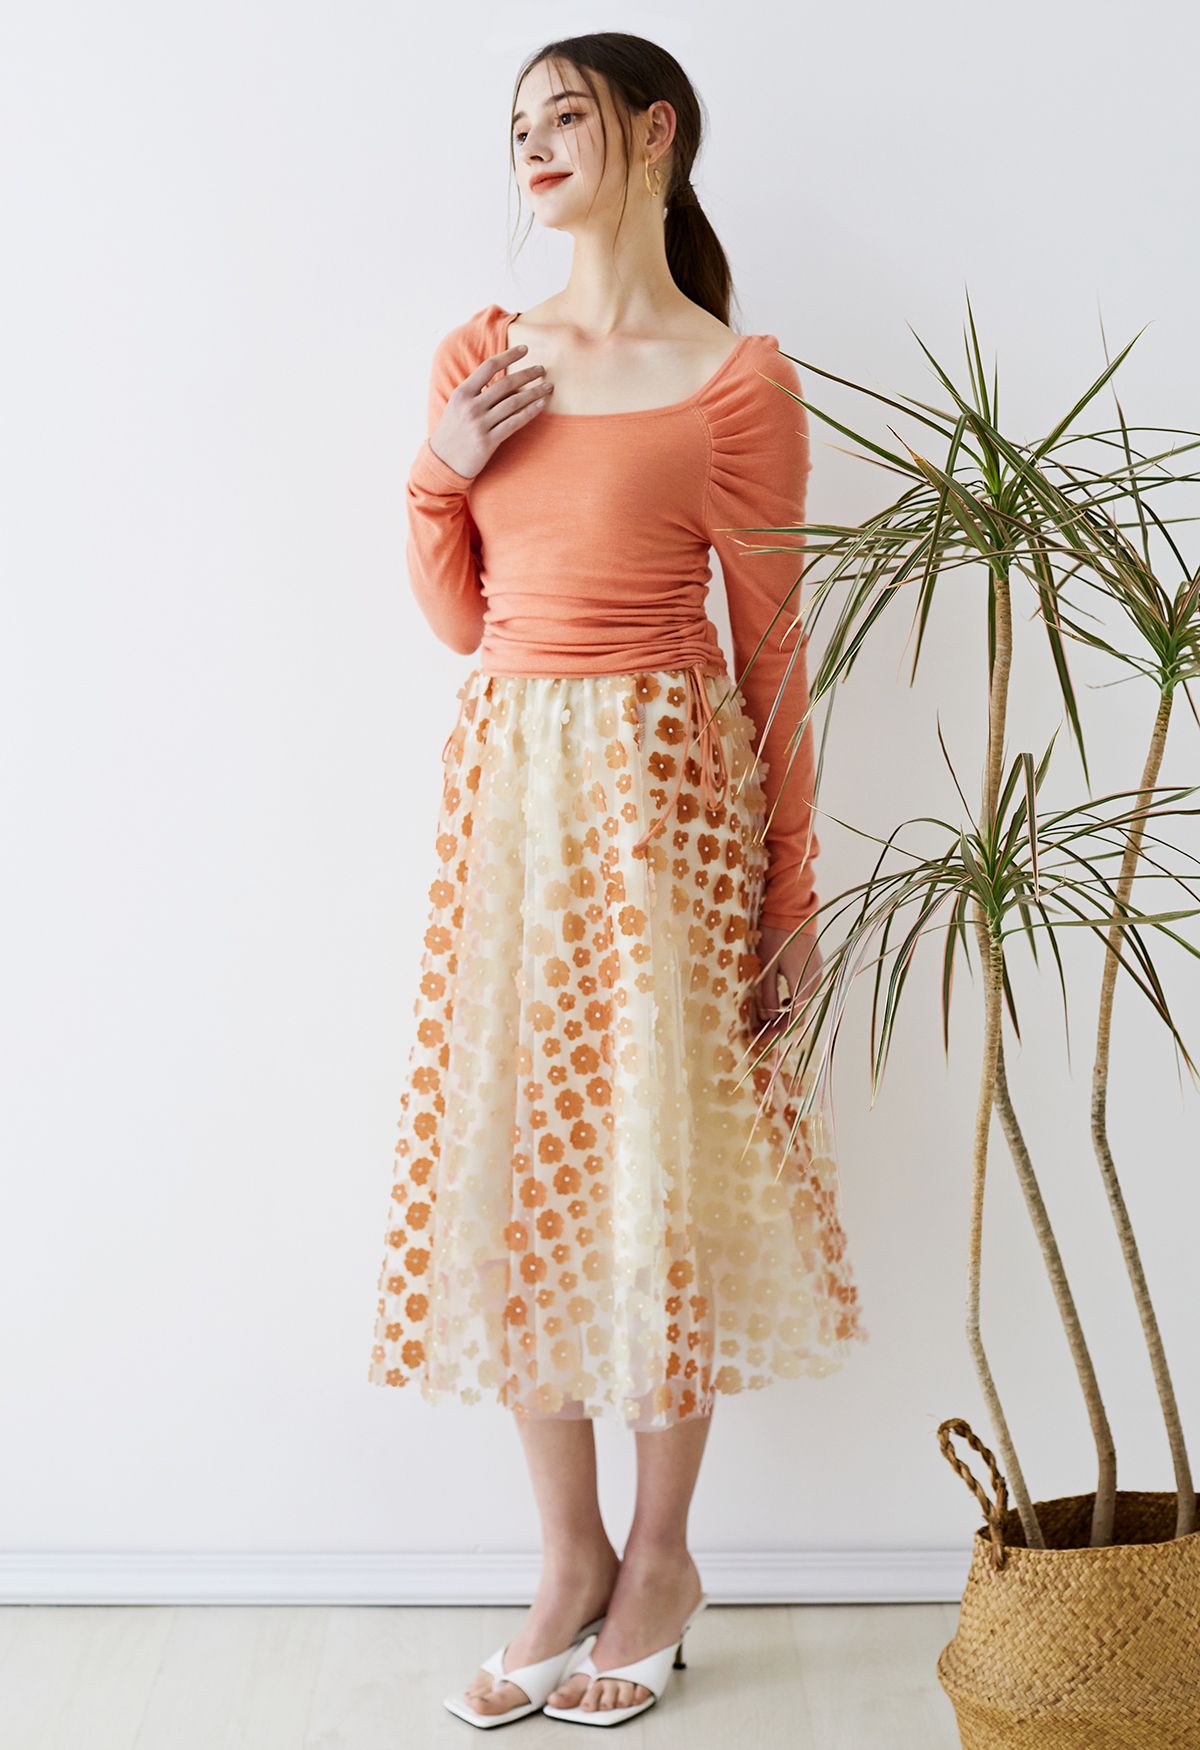 Gradient 3D Flower Double-Layered Mesh Skirt in Apricot